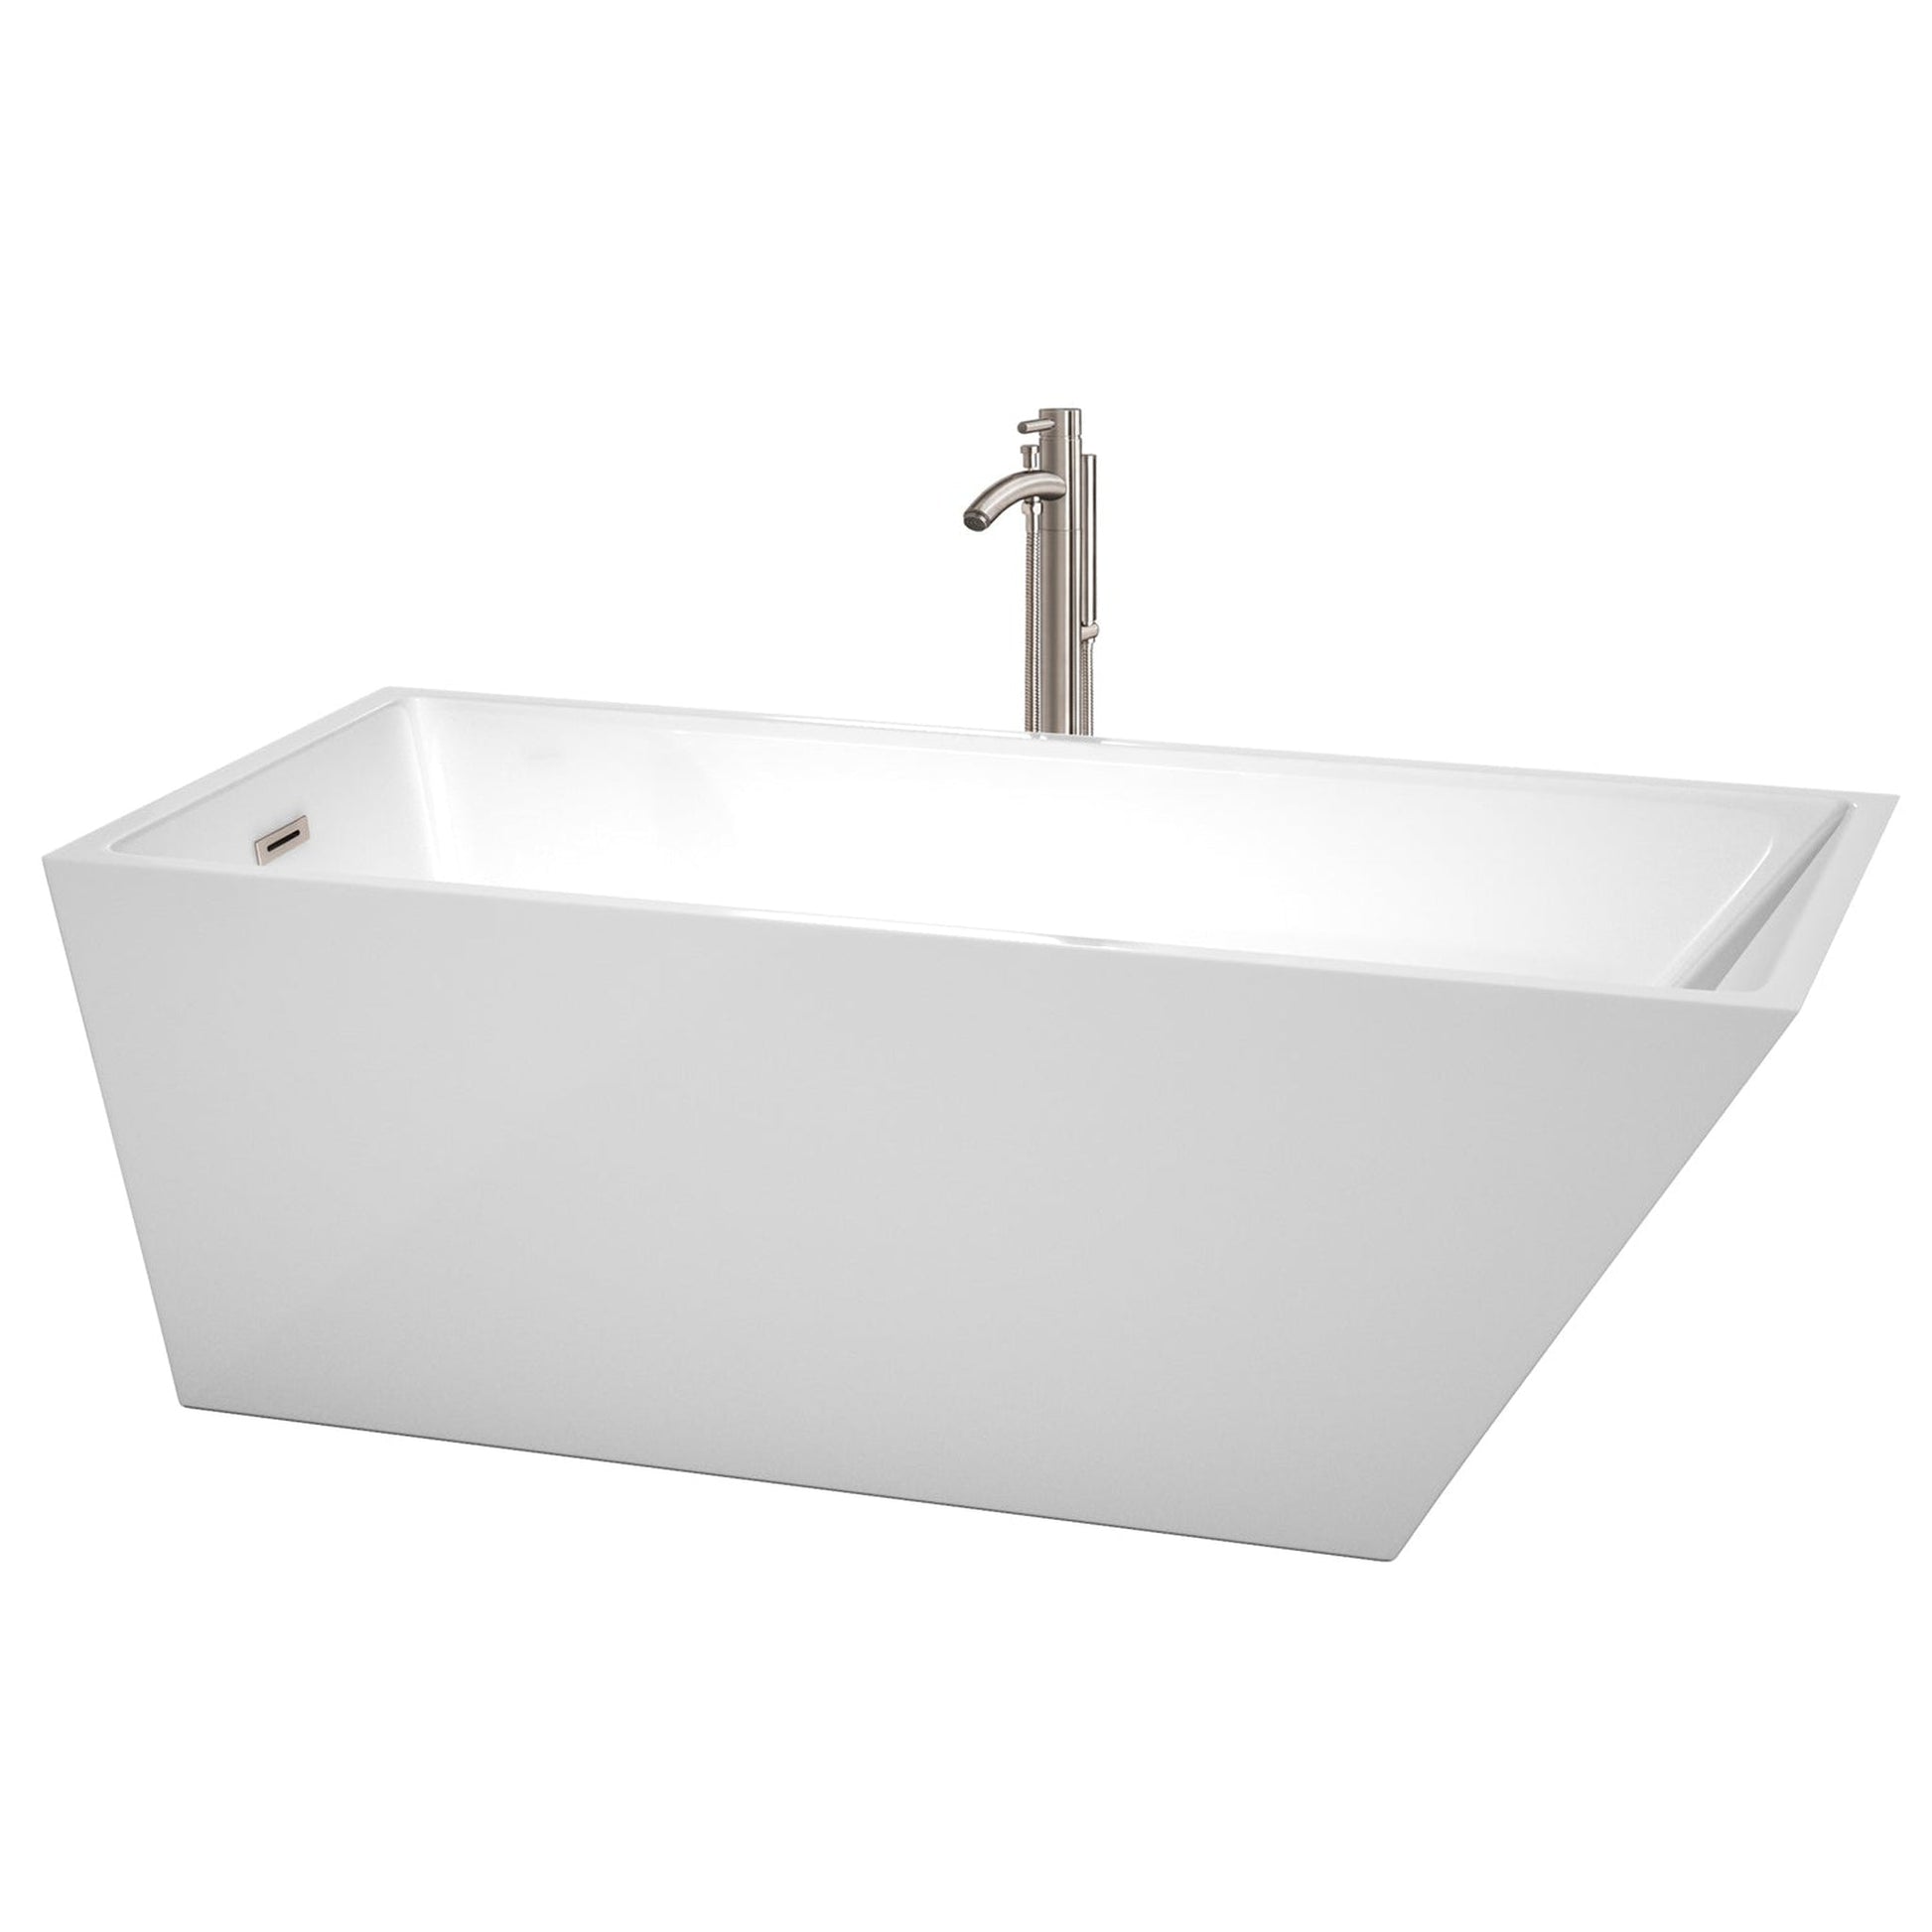 Wyndham Collection Hannah 67" Freestanding Bathtub in White With Floor Mounted Faucet, Drain and Overflow Trim in Brushed Nickel